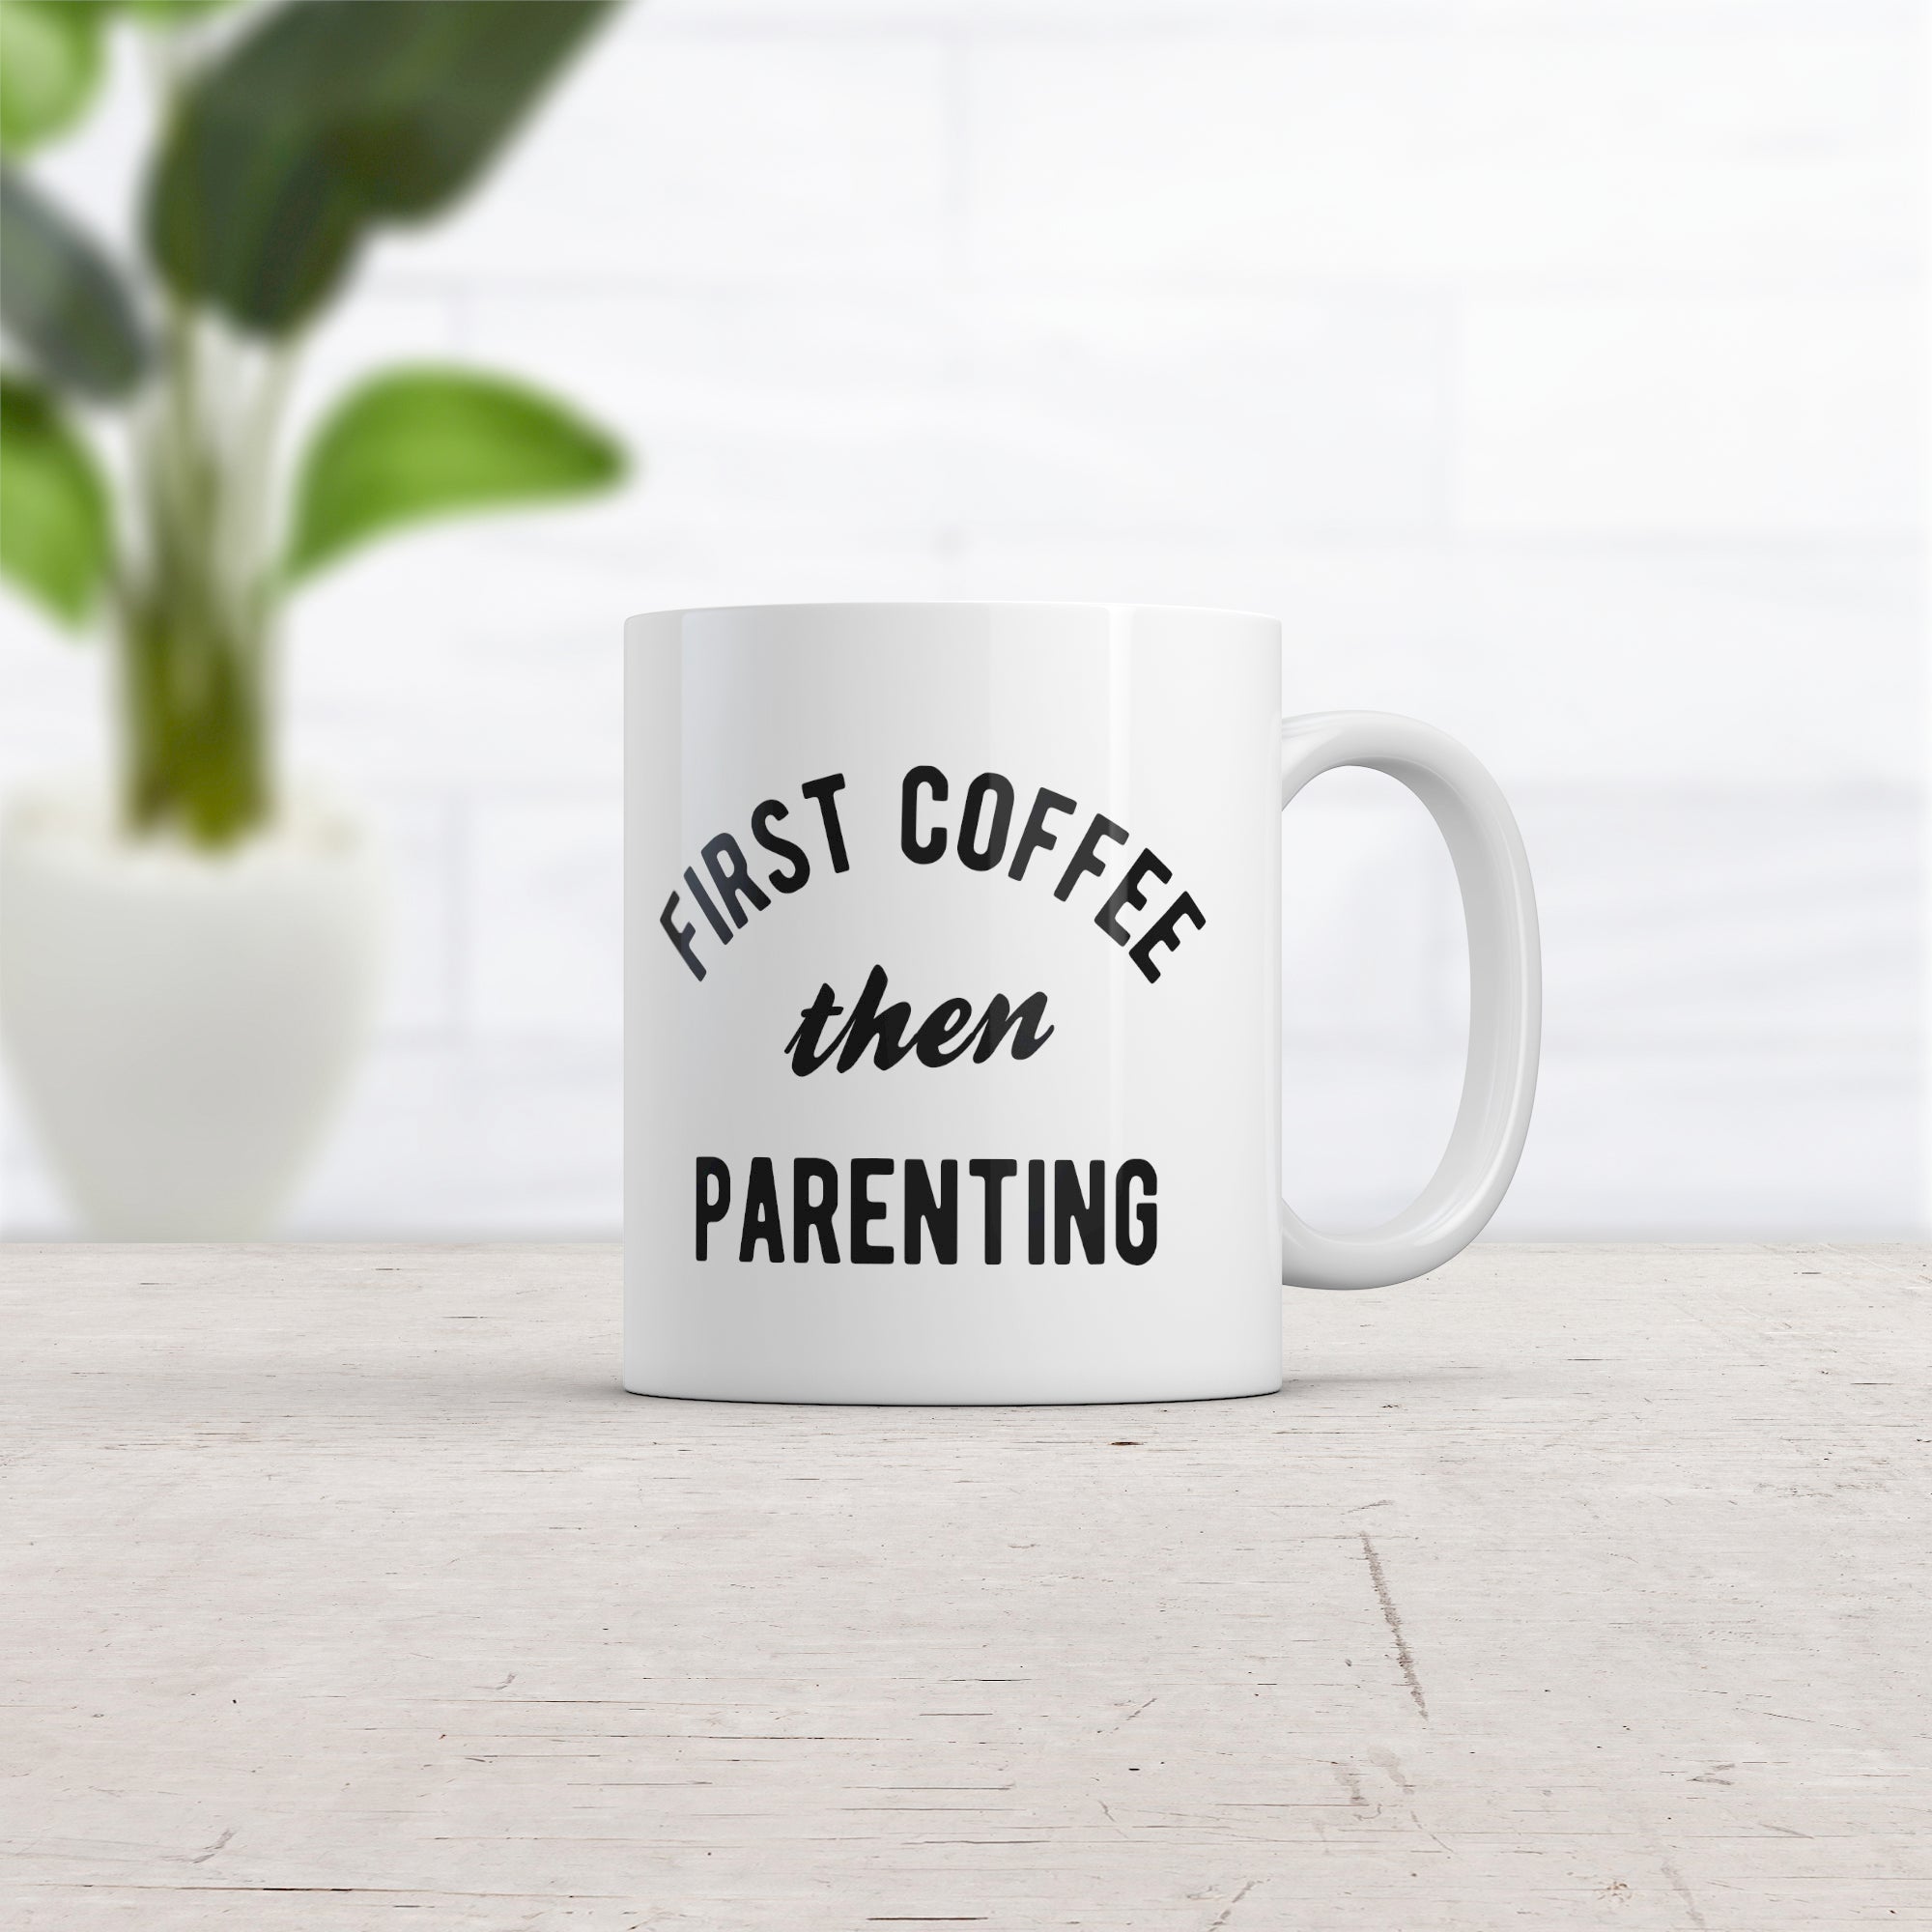 Funny White First Coffee Then Parenting Coffee Mug Nerdy Coffee Sarcastic Tee